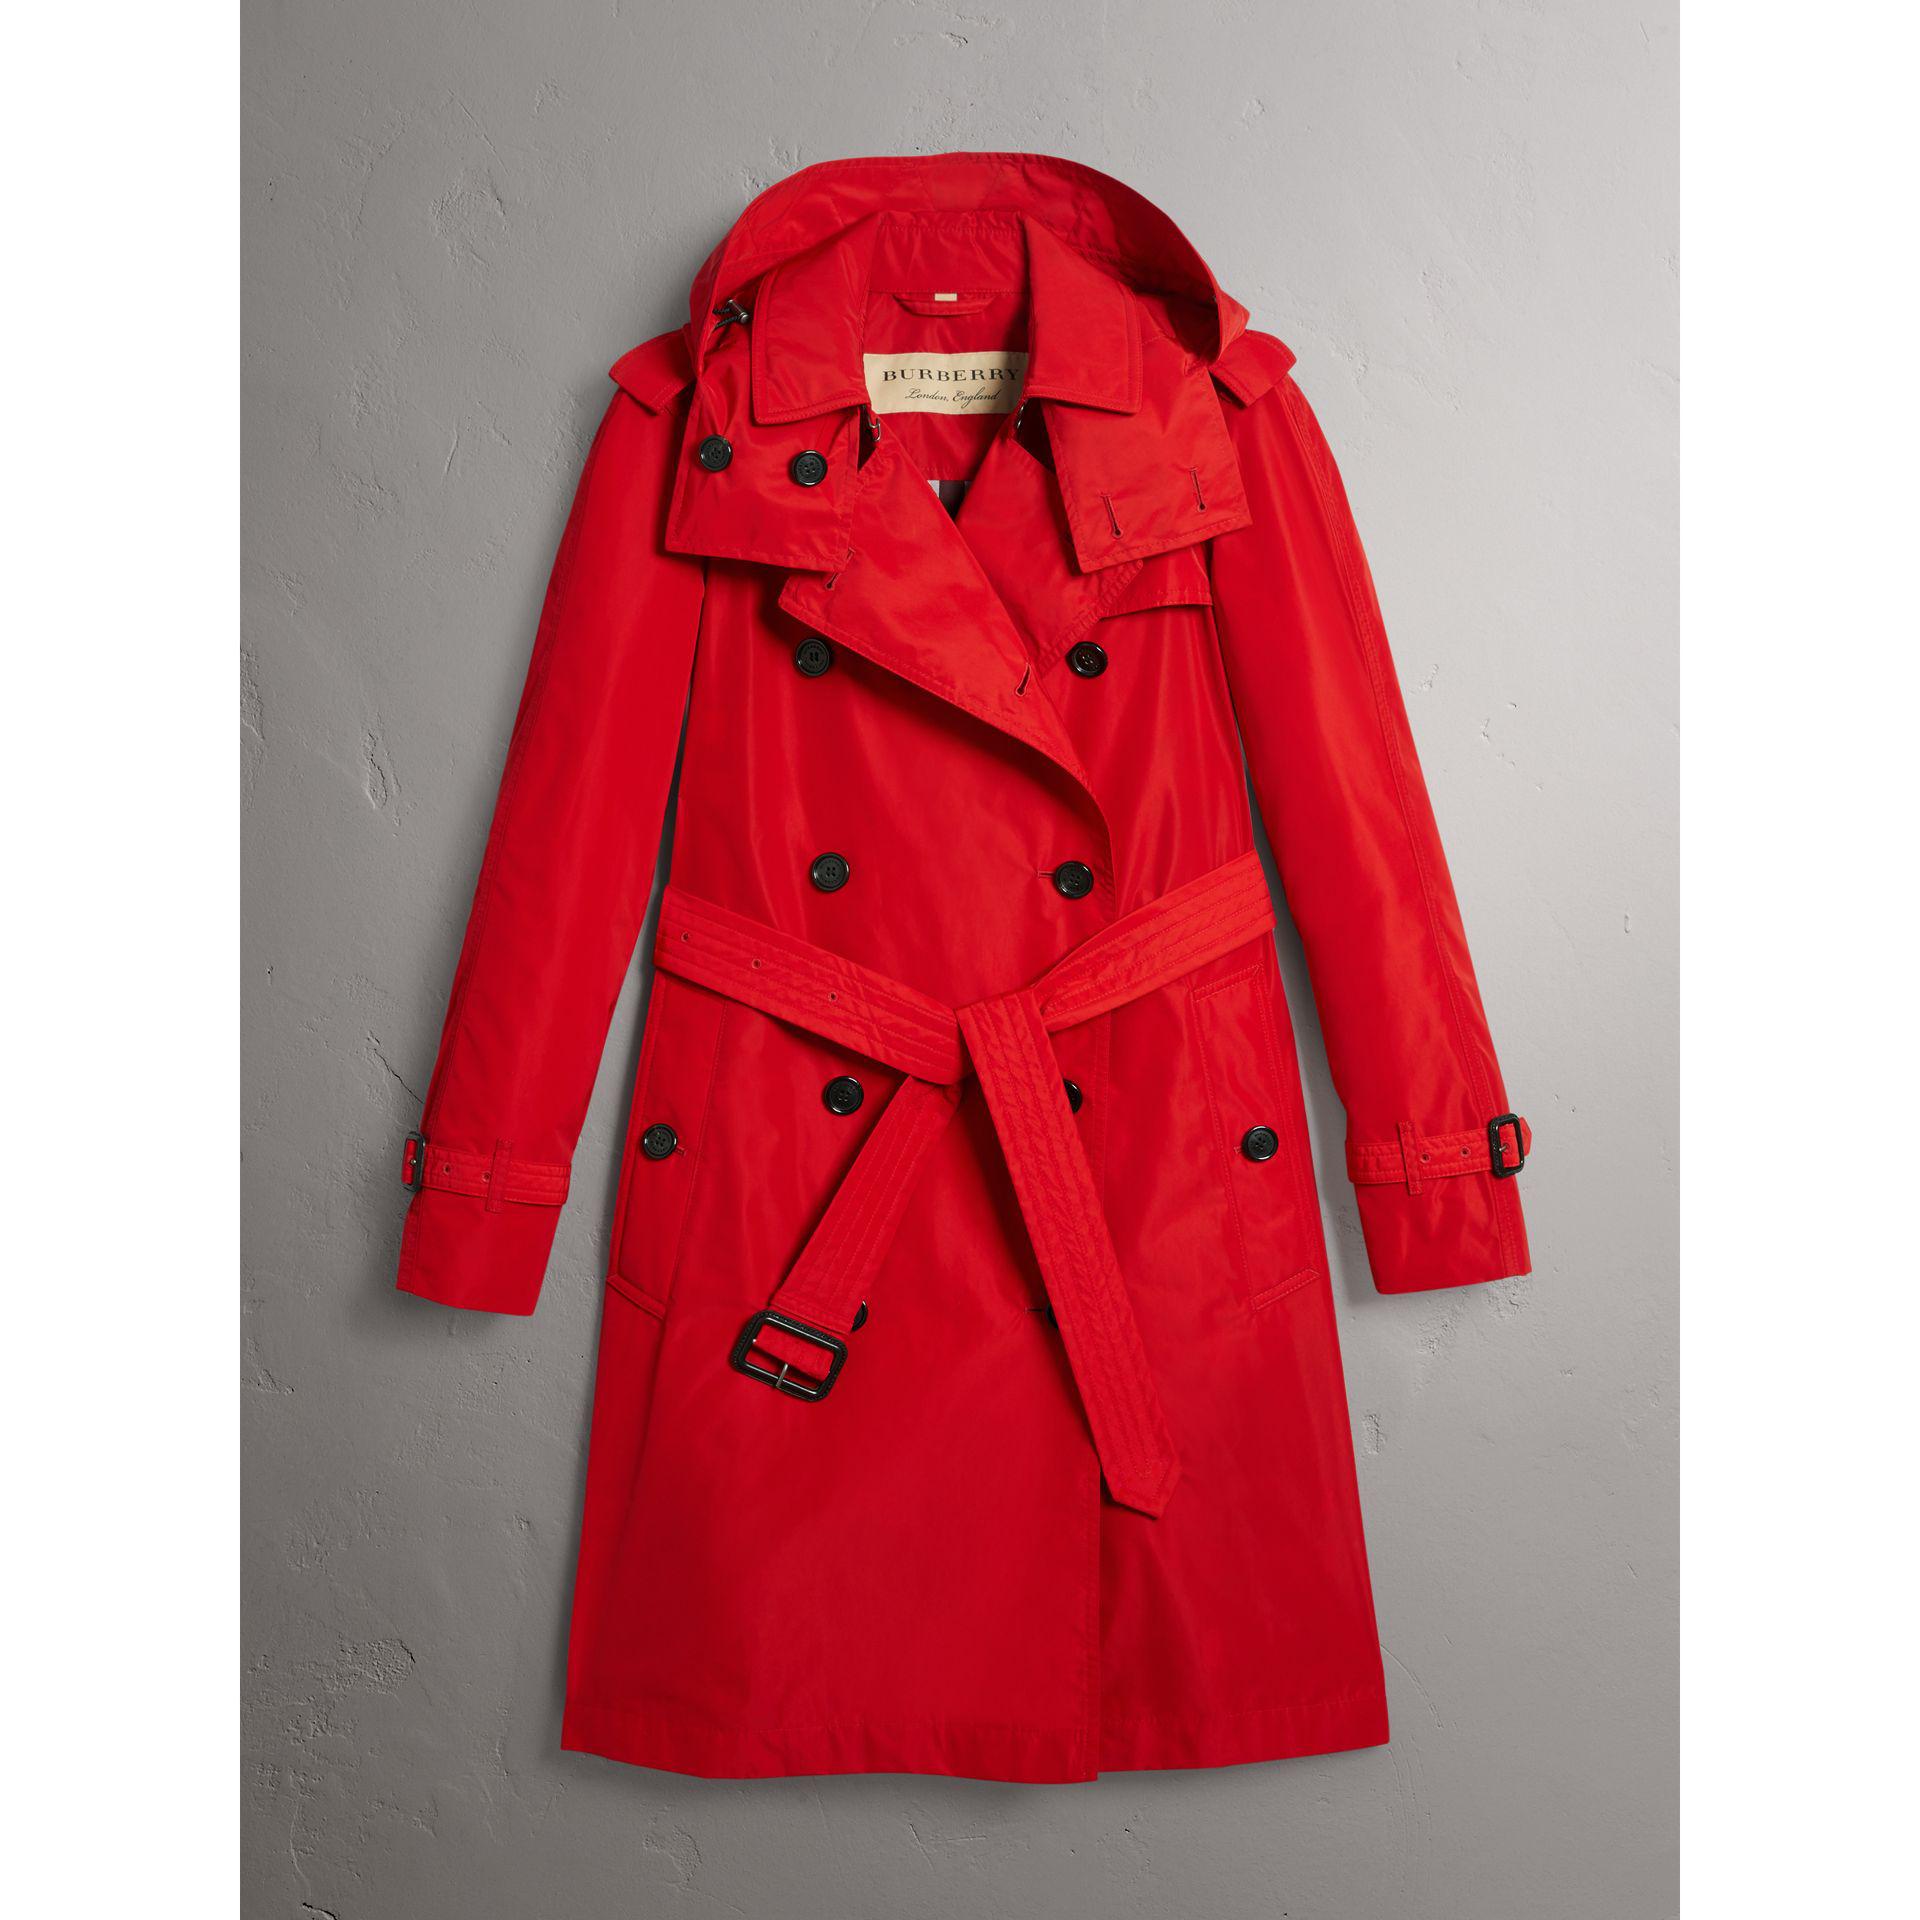 Lyst - Burberry Detachable Hood Taffeta Trench Coat in Red